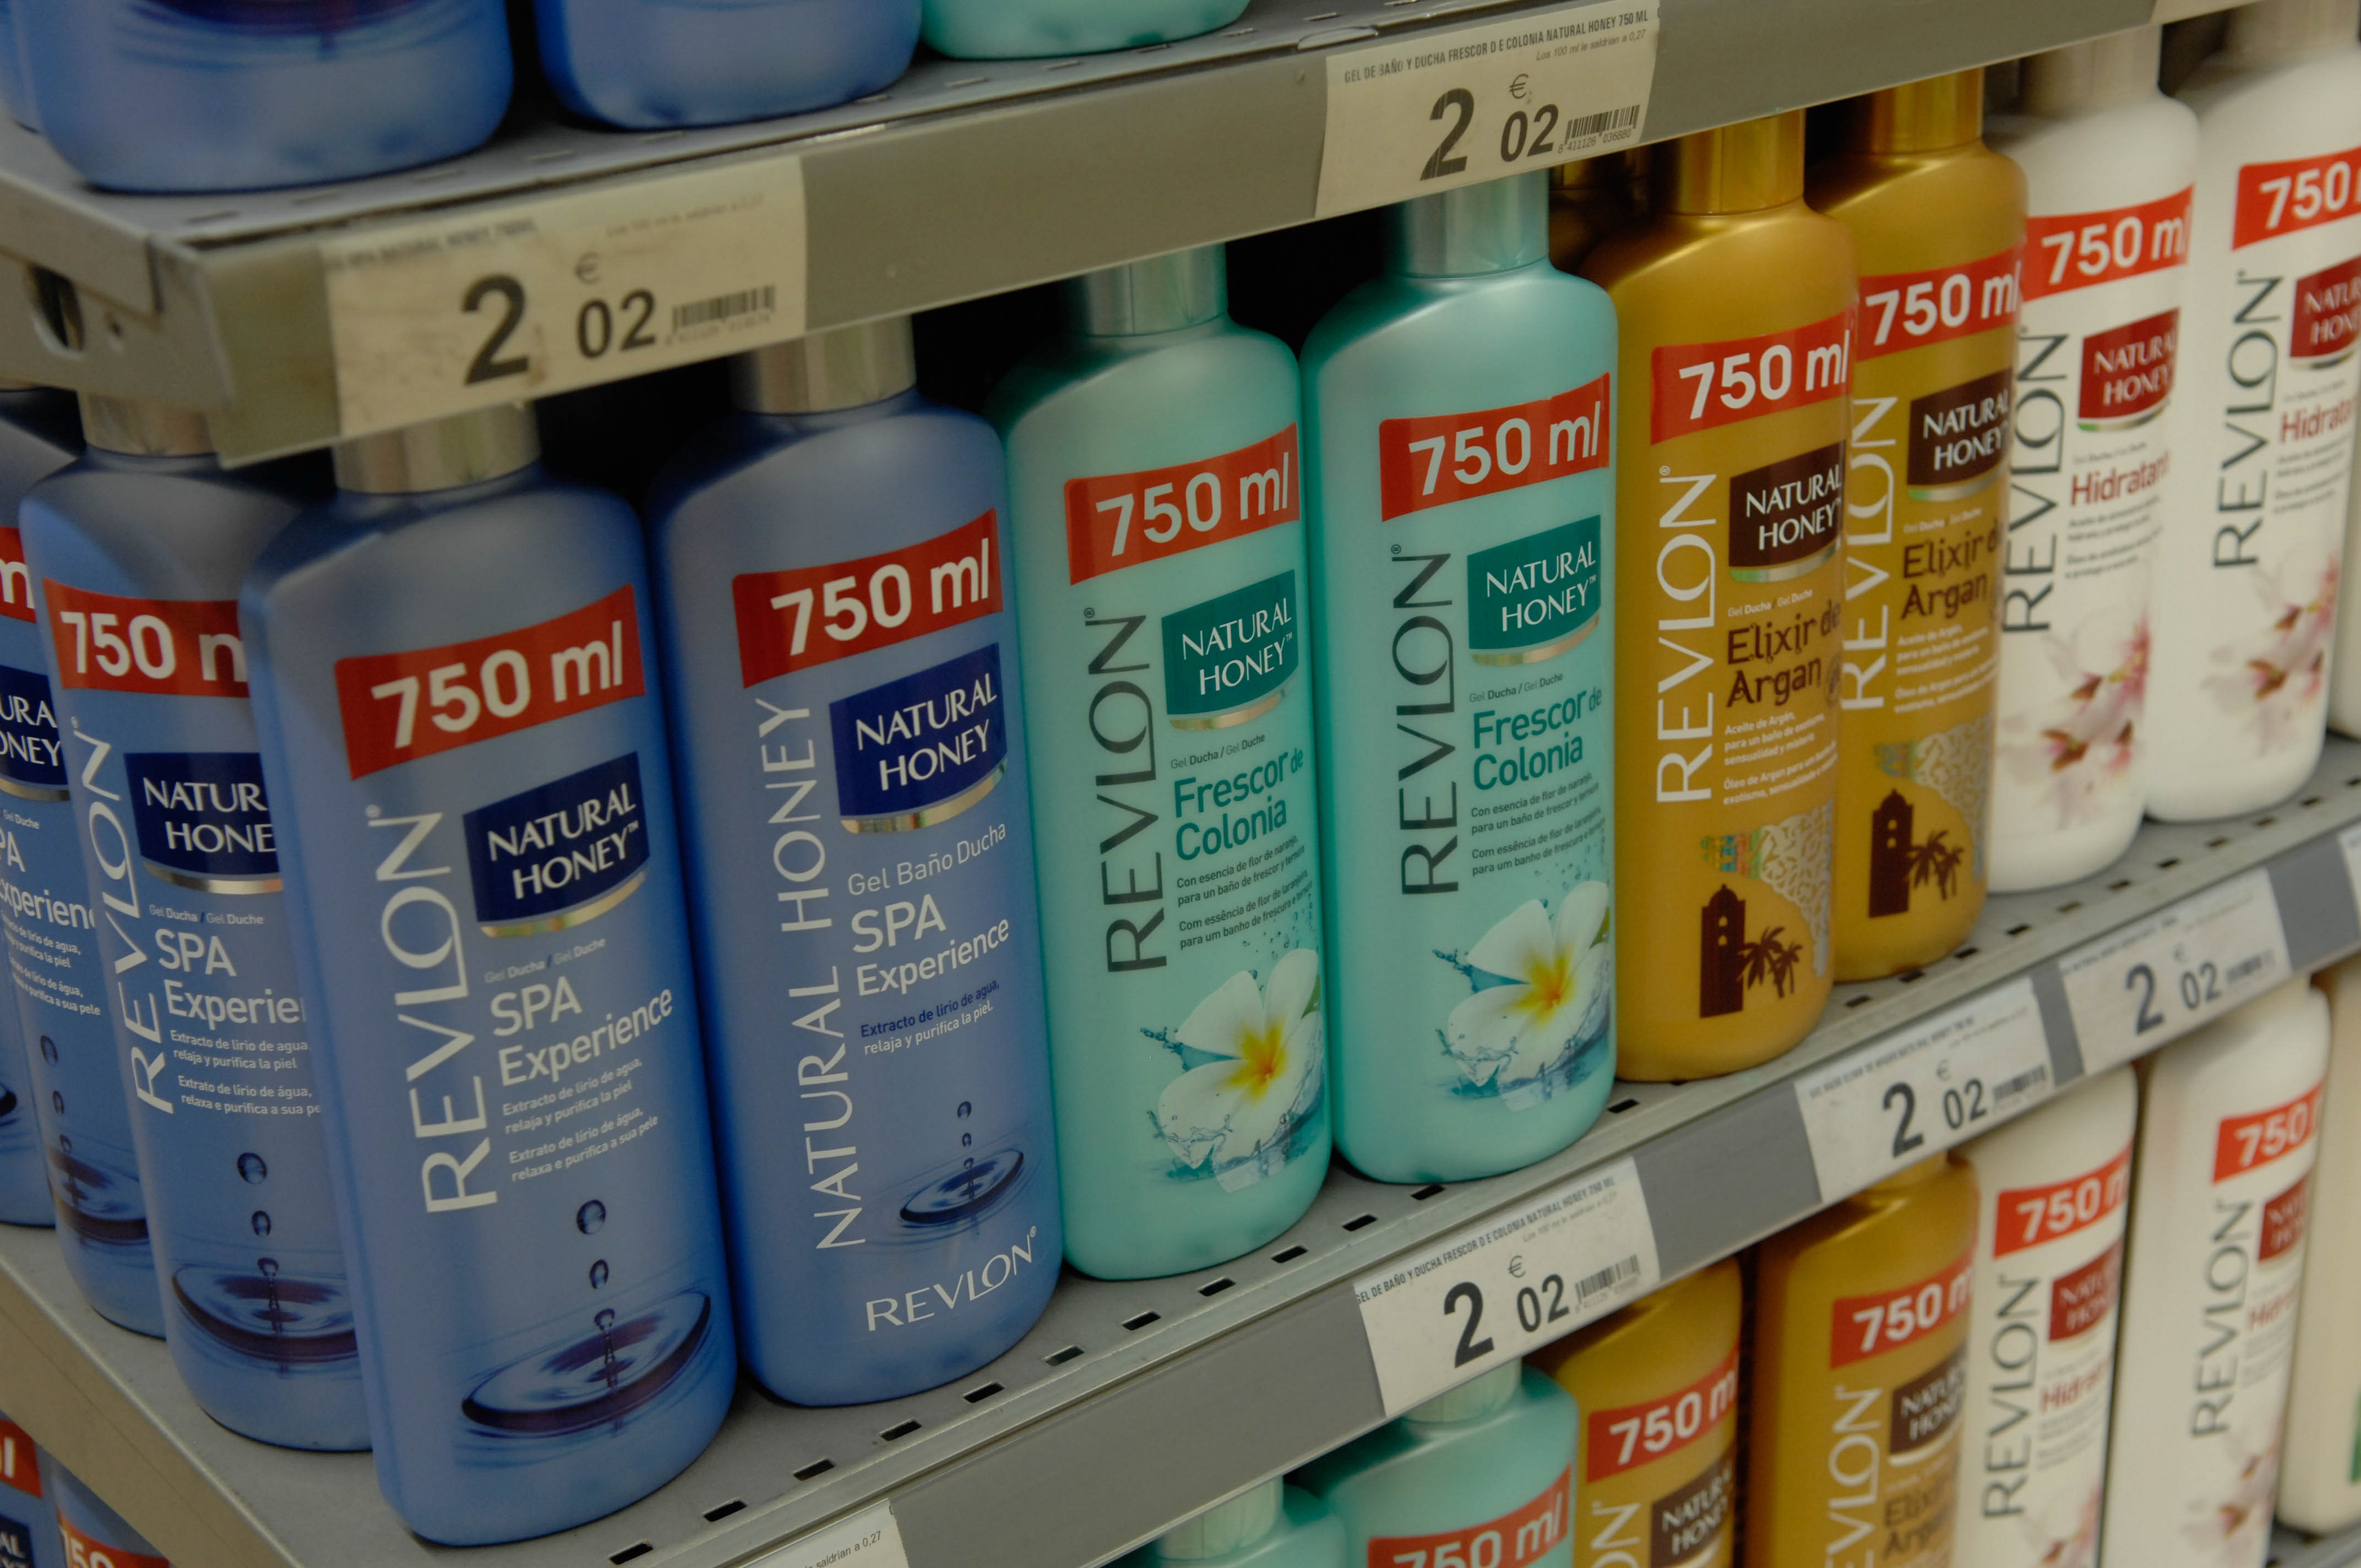 Revlon shower gel products pictured on shelf in March 11, 2016 | Source: Getty Images